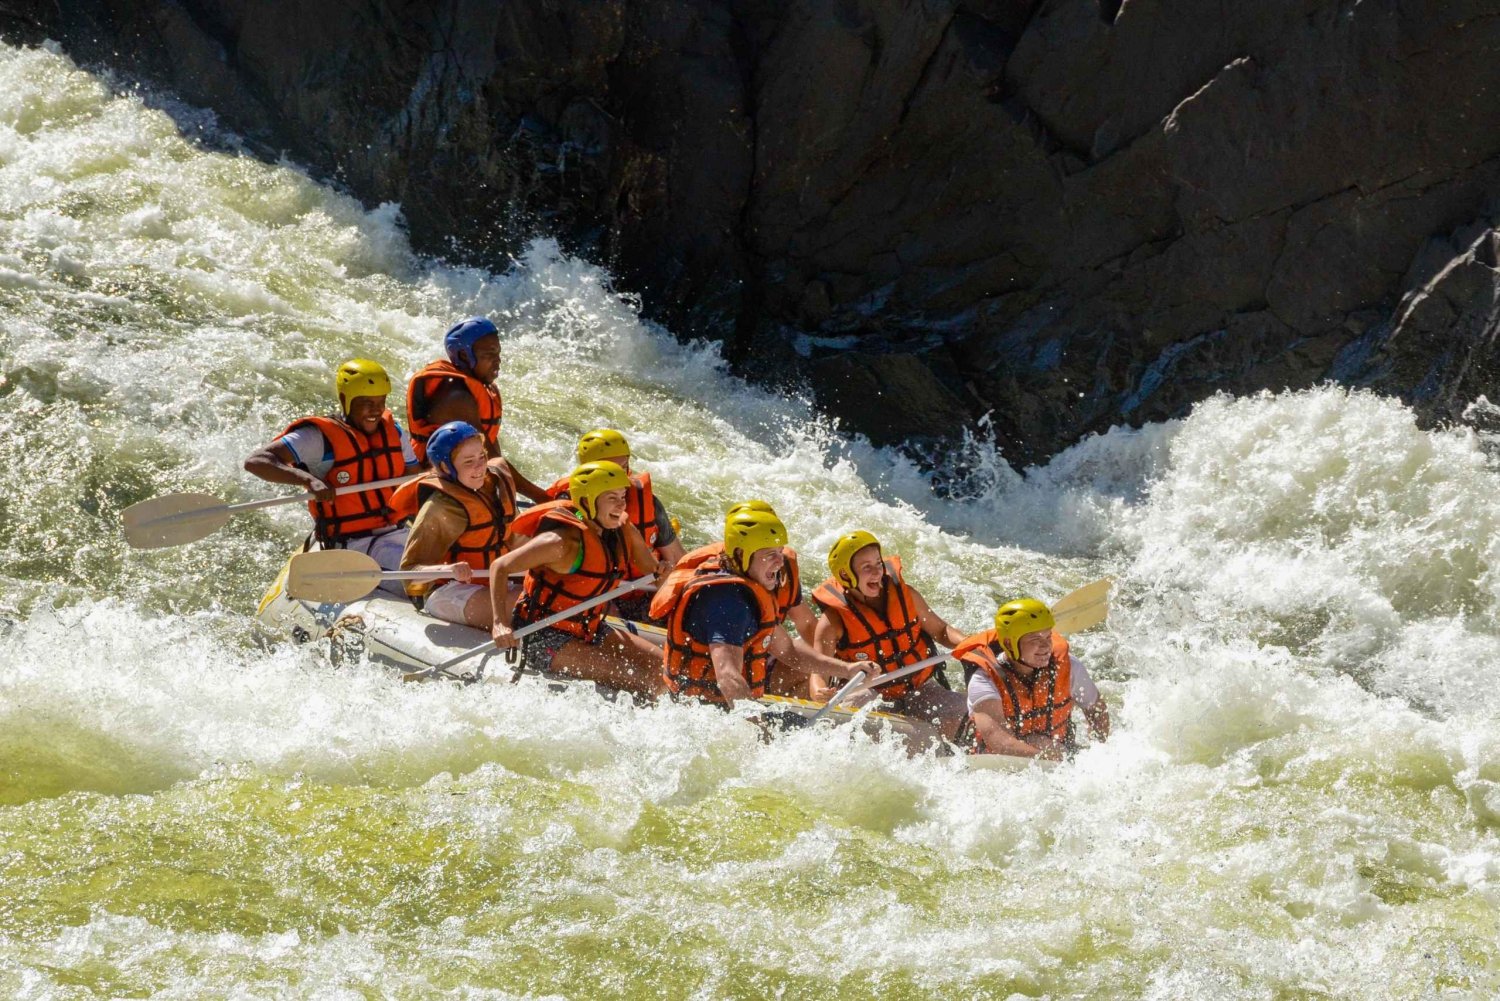 Victoria Falls: Whitewater Rafting Experience